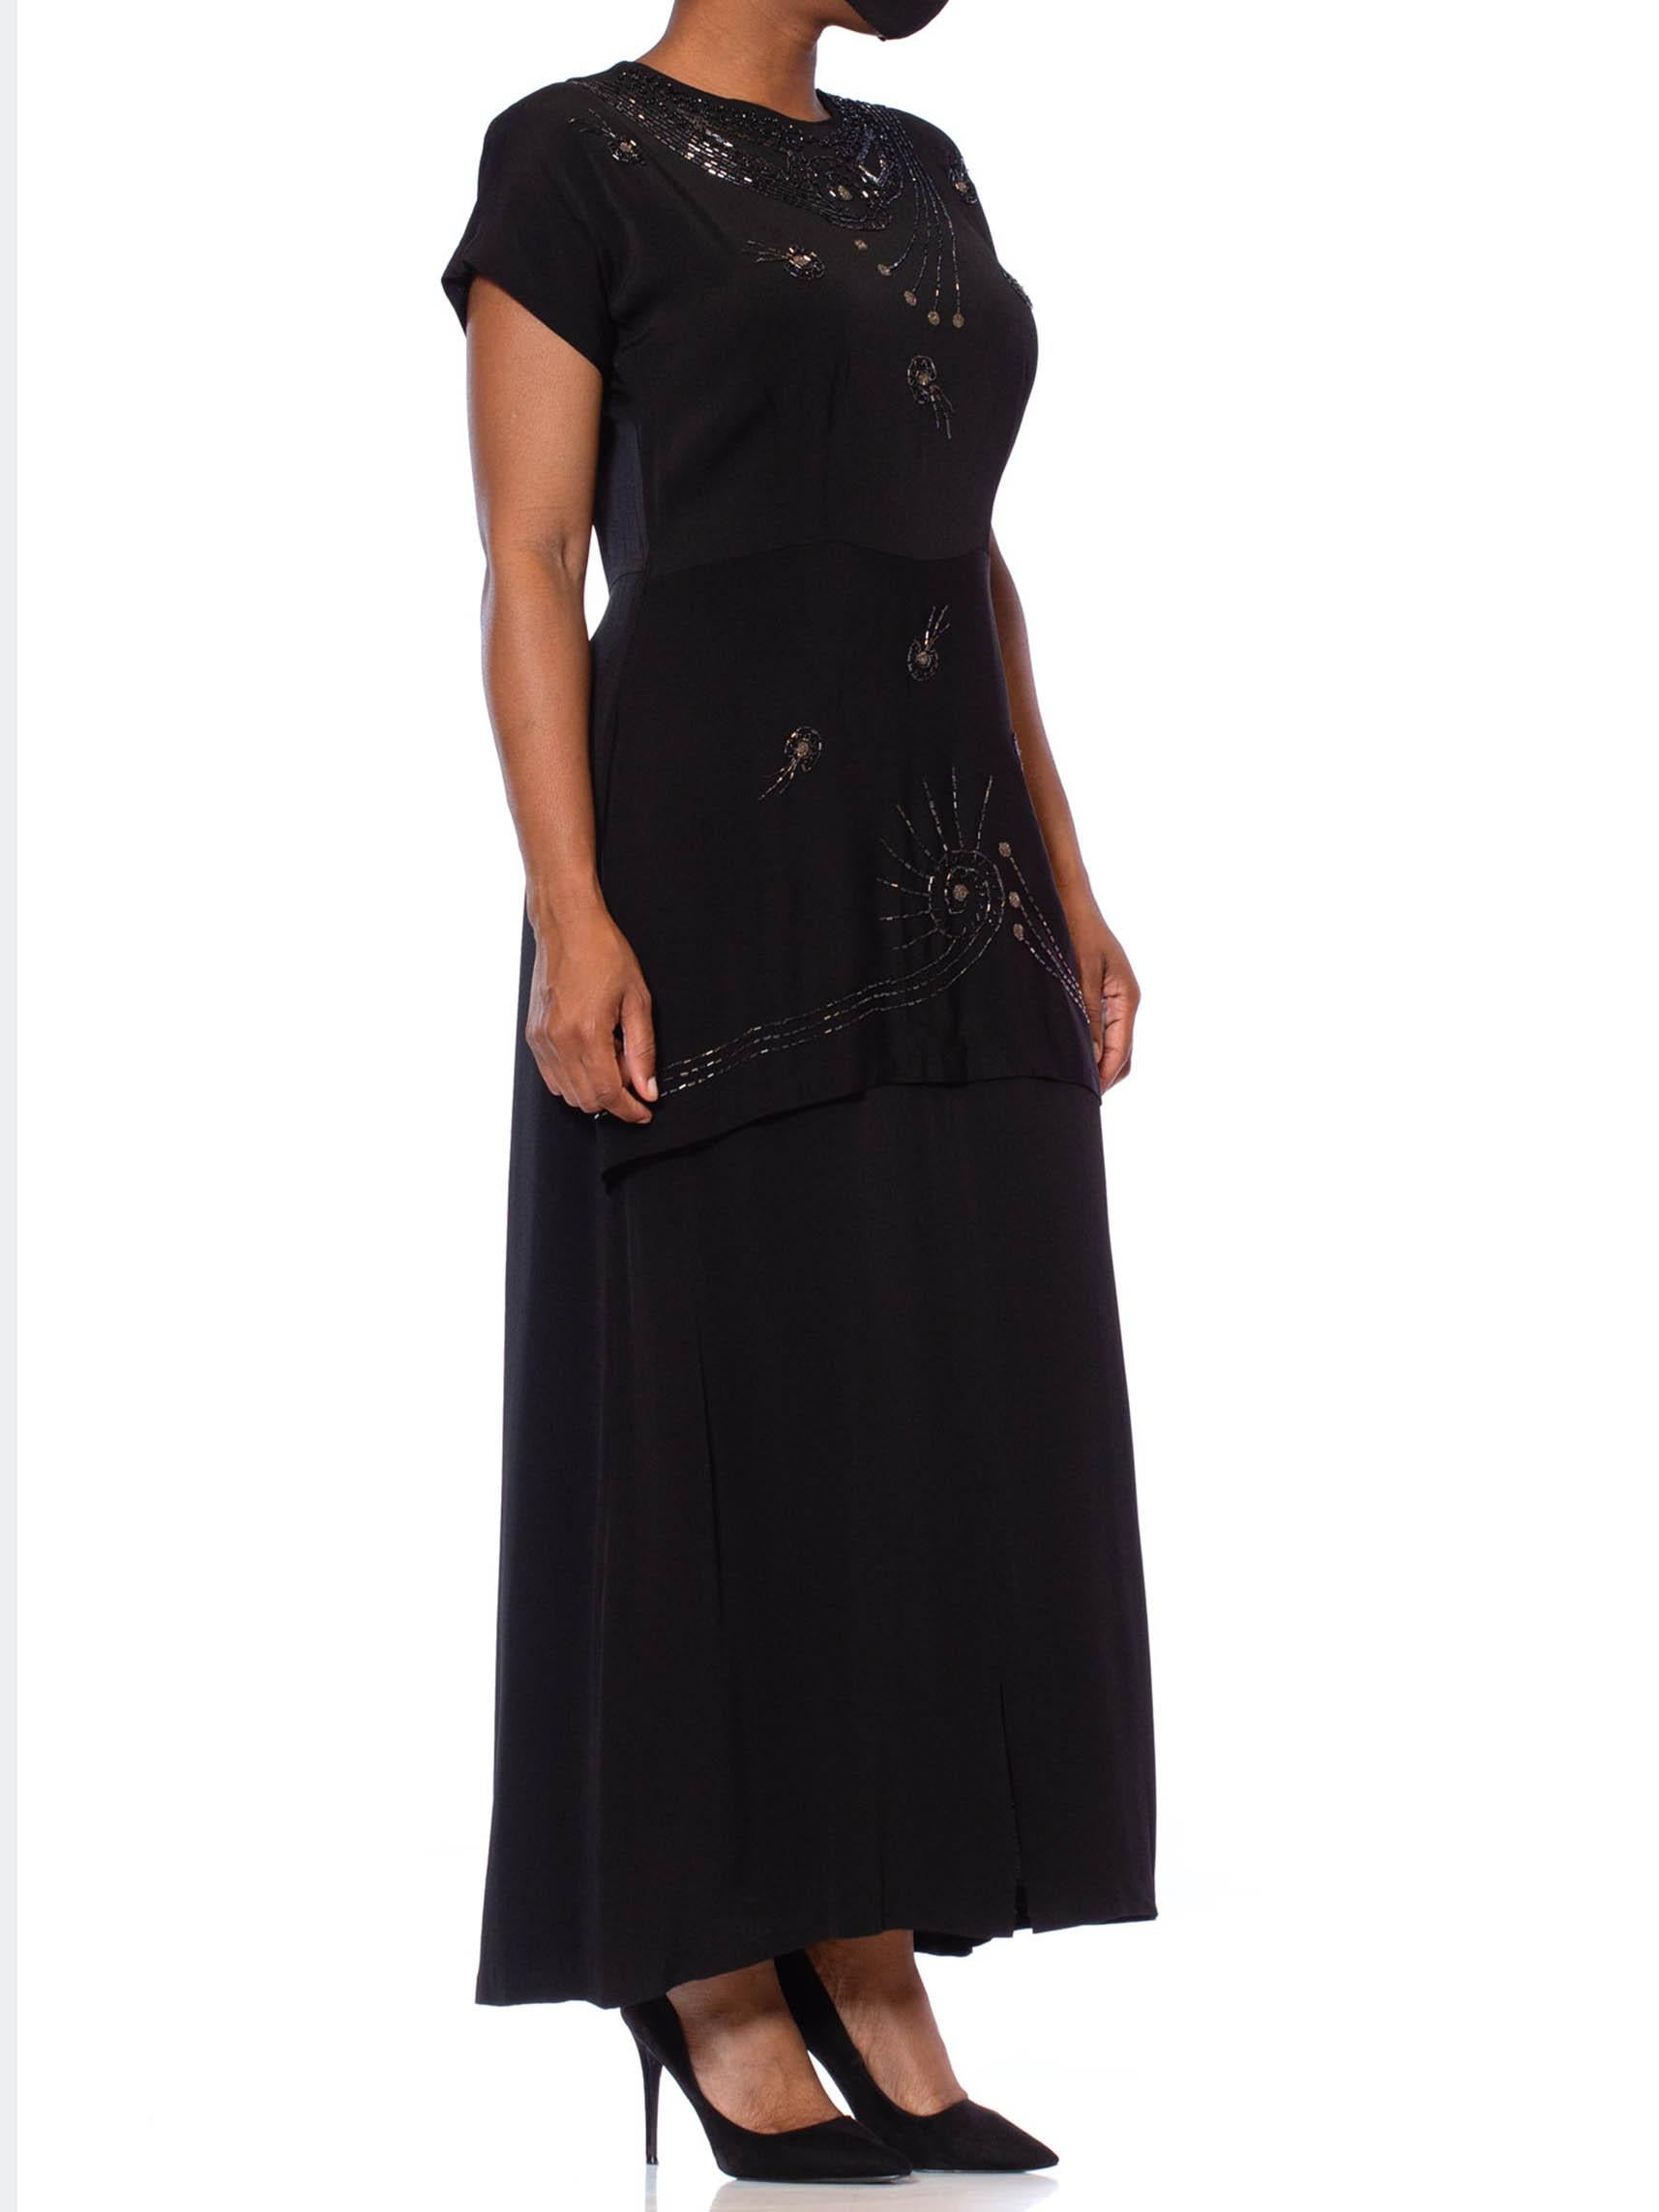 1940S Black Silk Faille Short Sleeved Midi Length Cocktail Dress With Beaded Sh In Excellent Condition For Sale In New York, NY